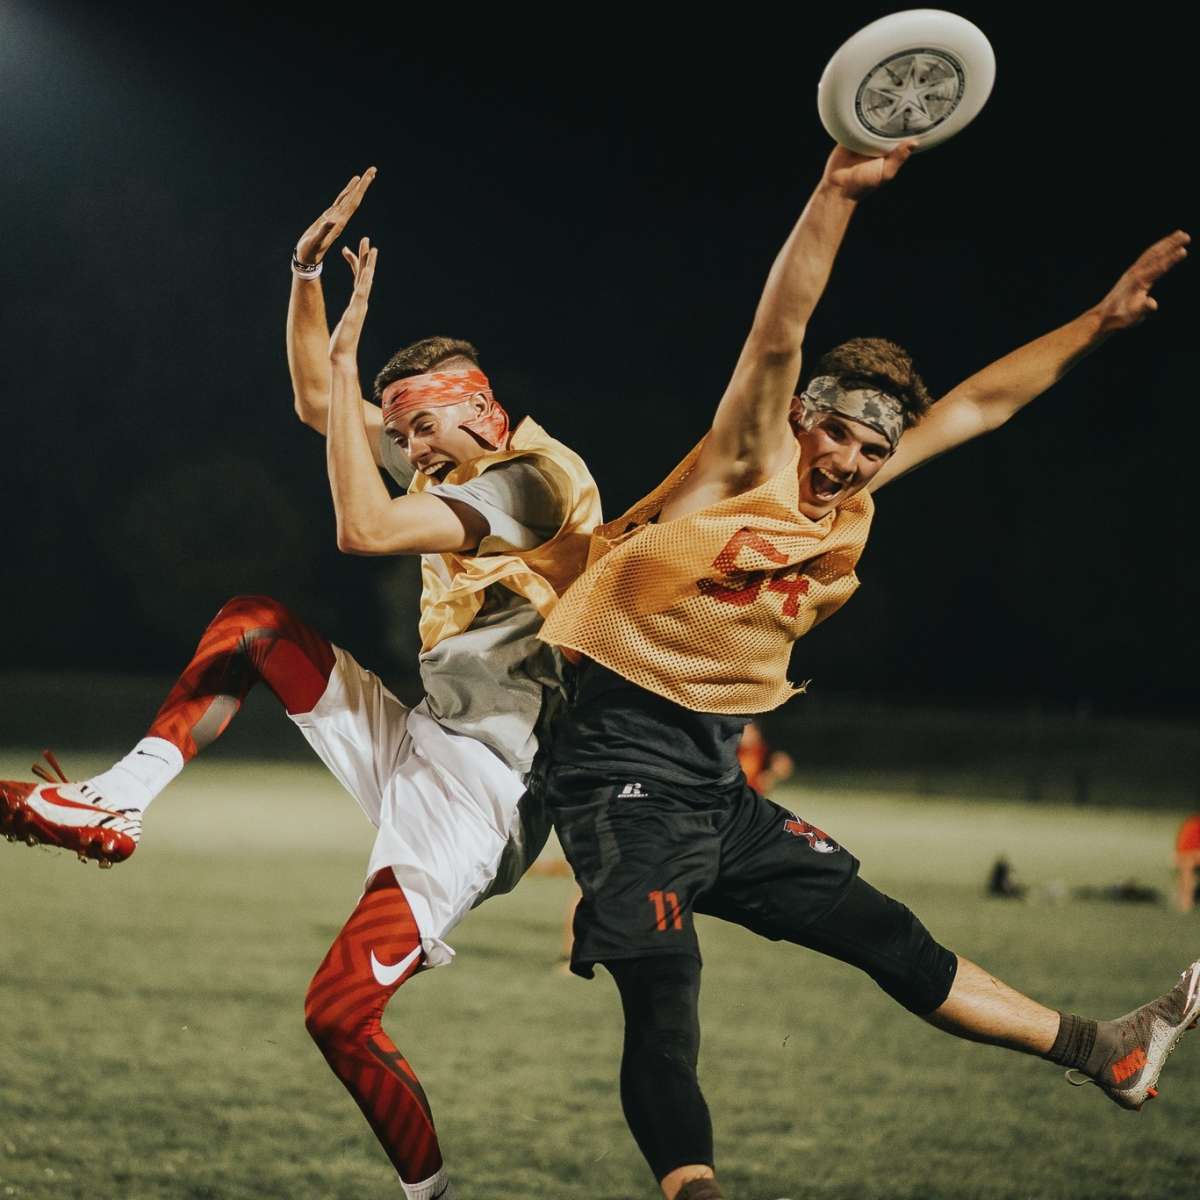 two students celebrate while playing ultimate frisbee